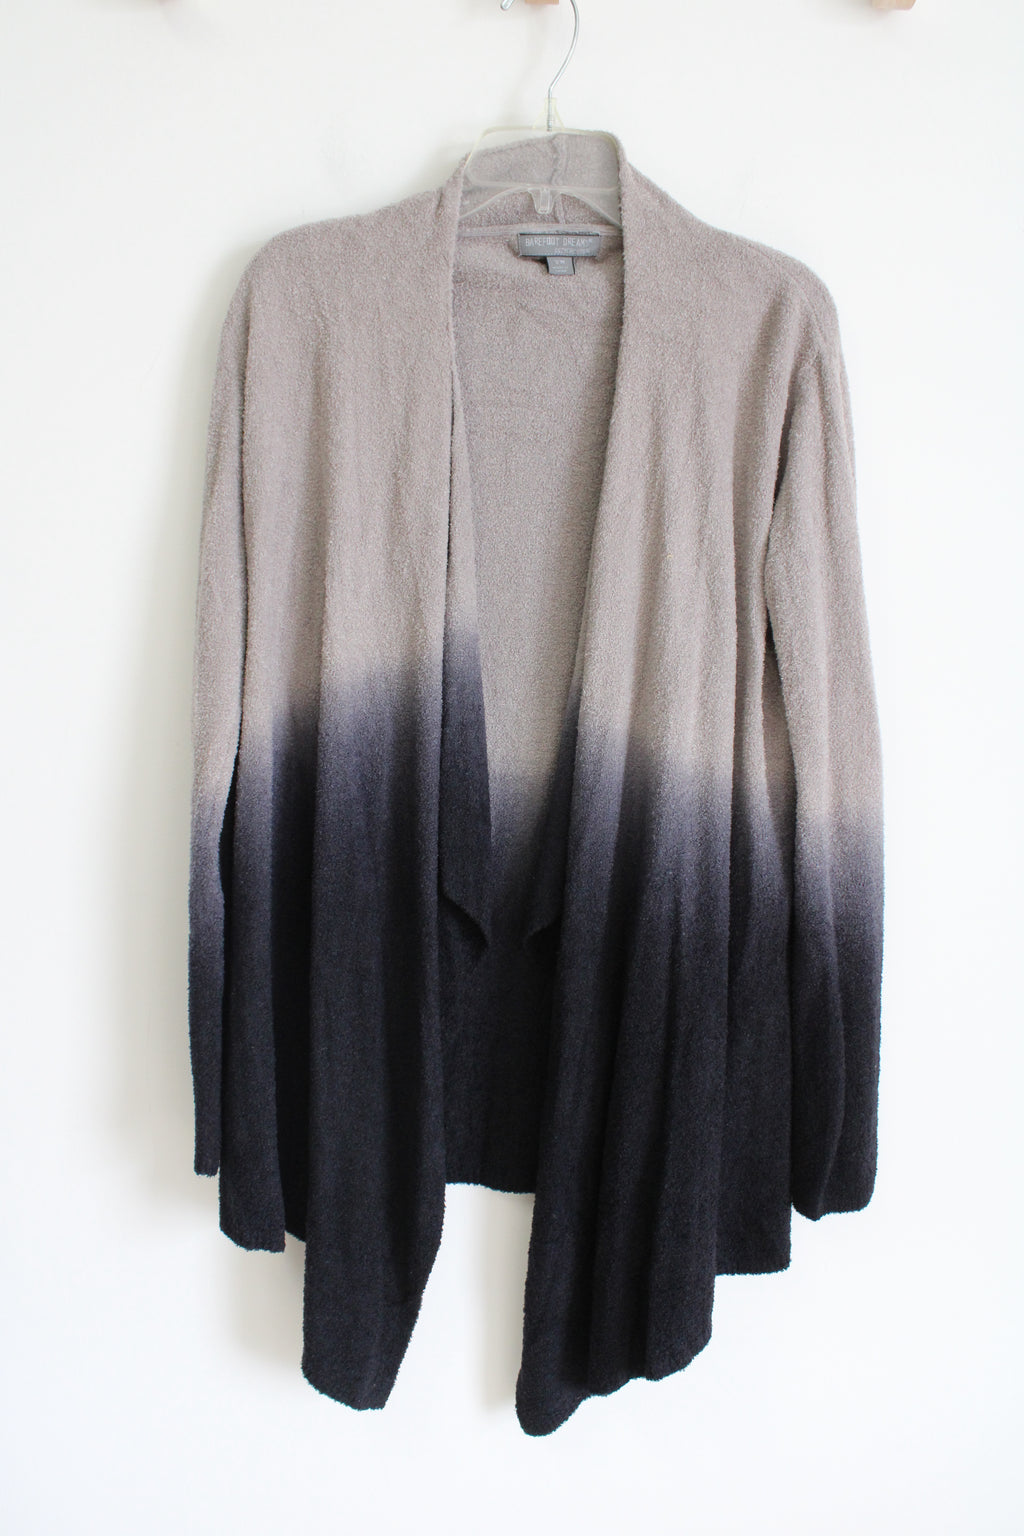 Barefoot Dreams CozyChic Lite Gray Ombre Cardigan | S/M